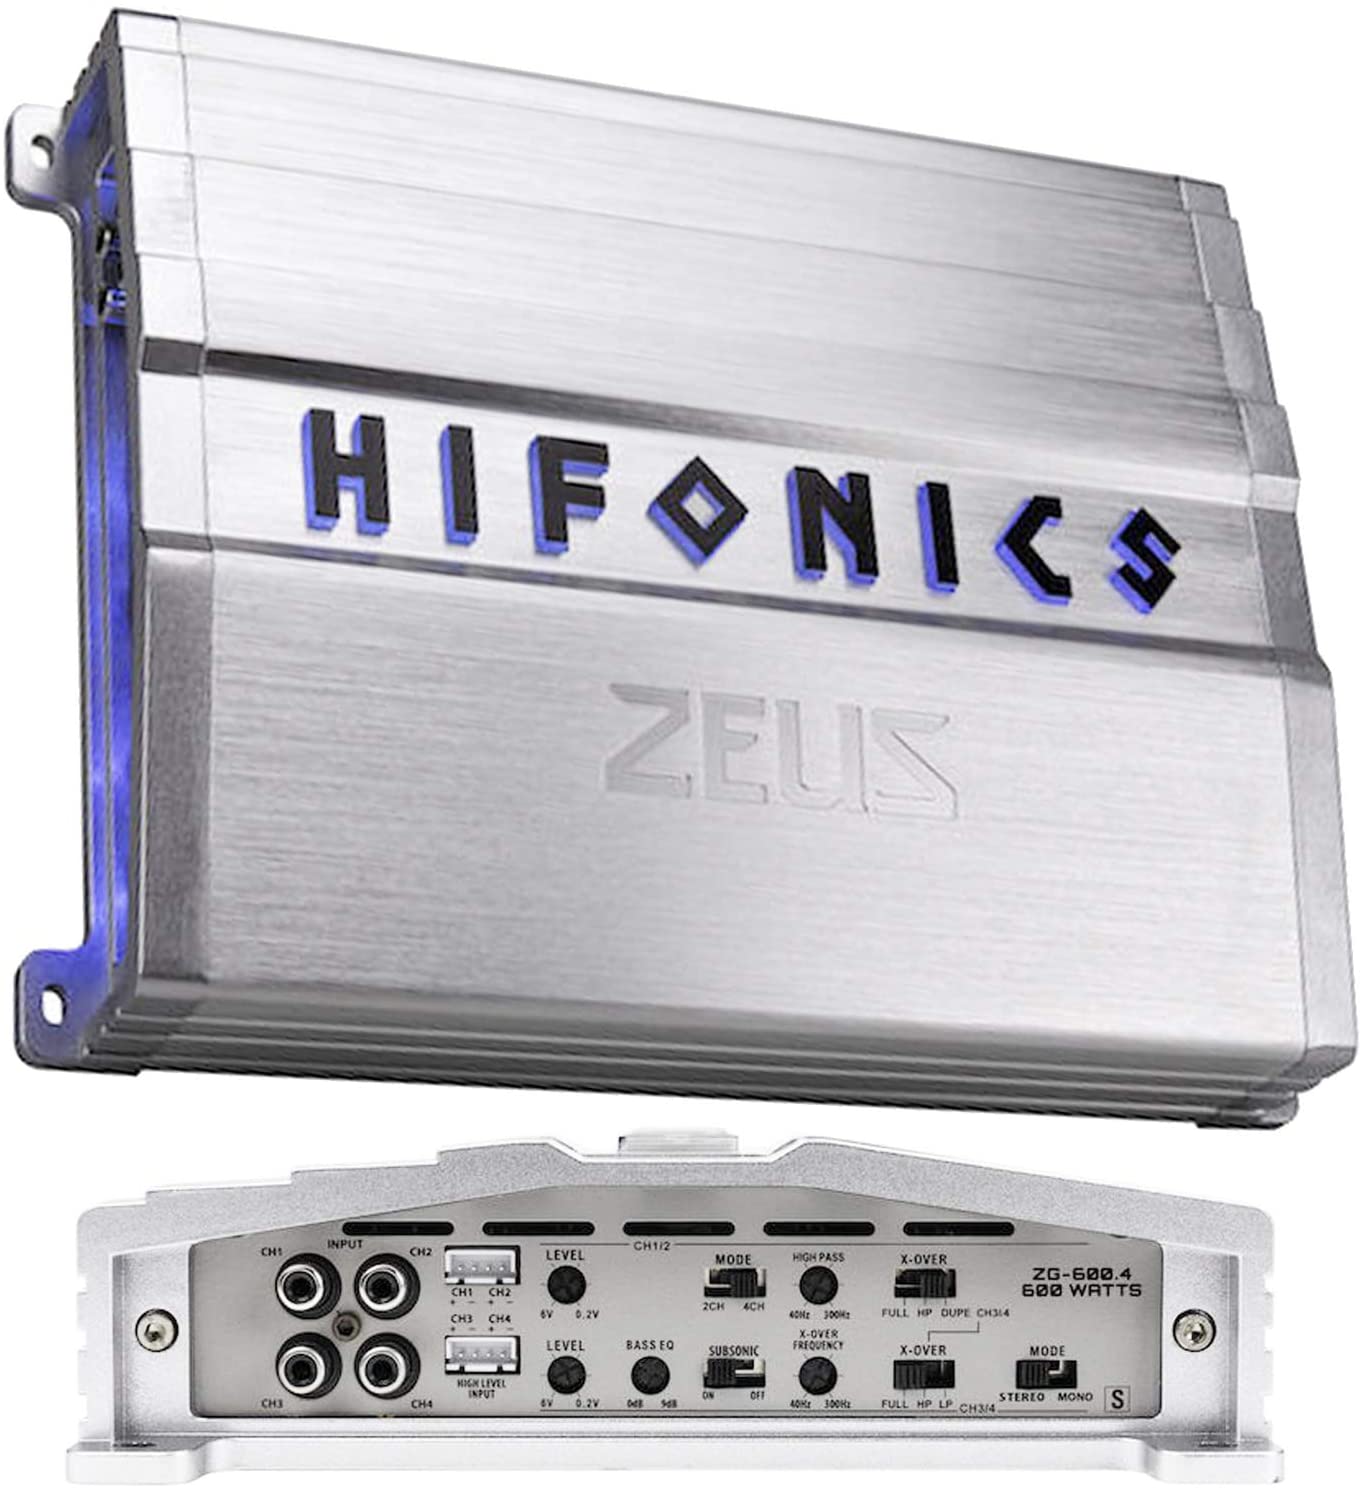 ZG-600.4 600W Zeus Gamma Series 4-Channel Car Audio Subwoofer Amplifier with Gravity Magnet Phone Holder